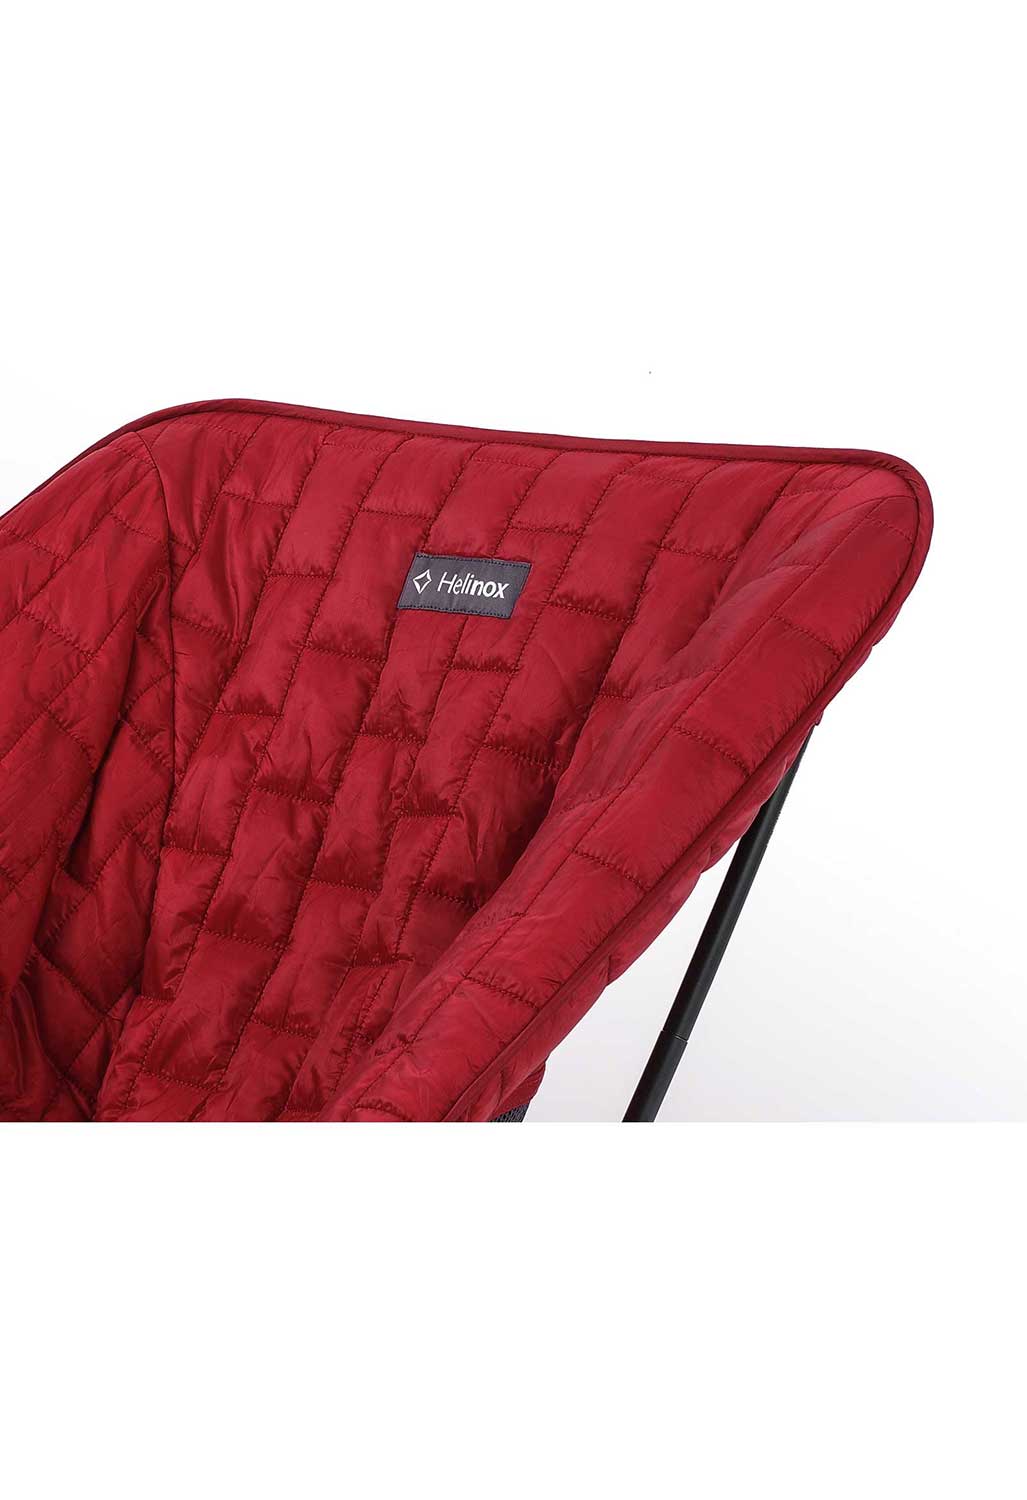 Helinox Seat Warmer for Chair One - Scarlet/Iron